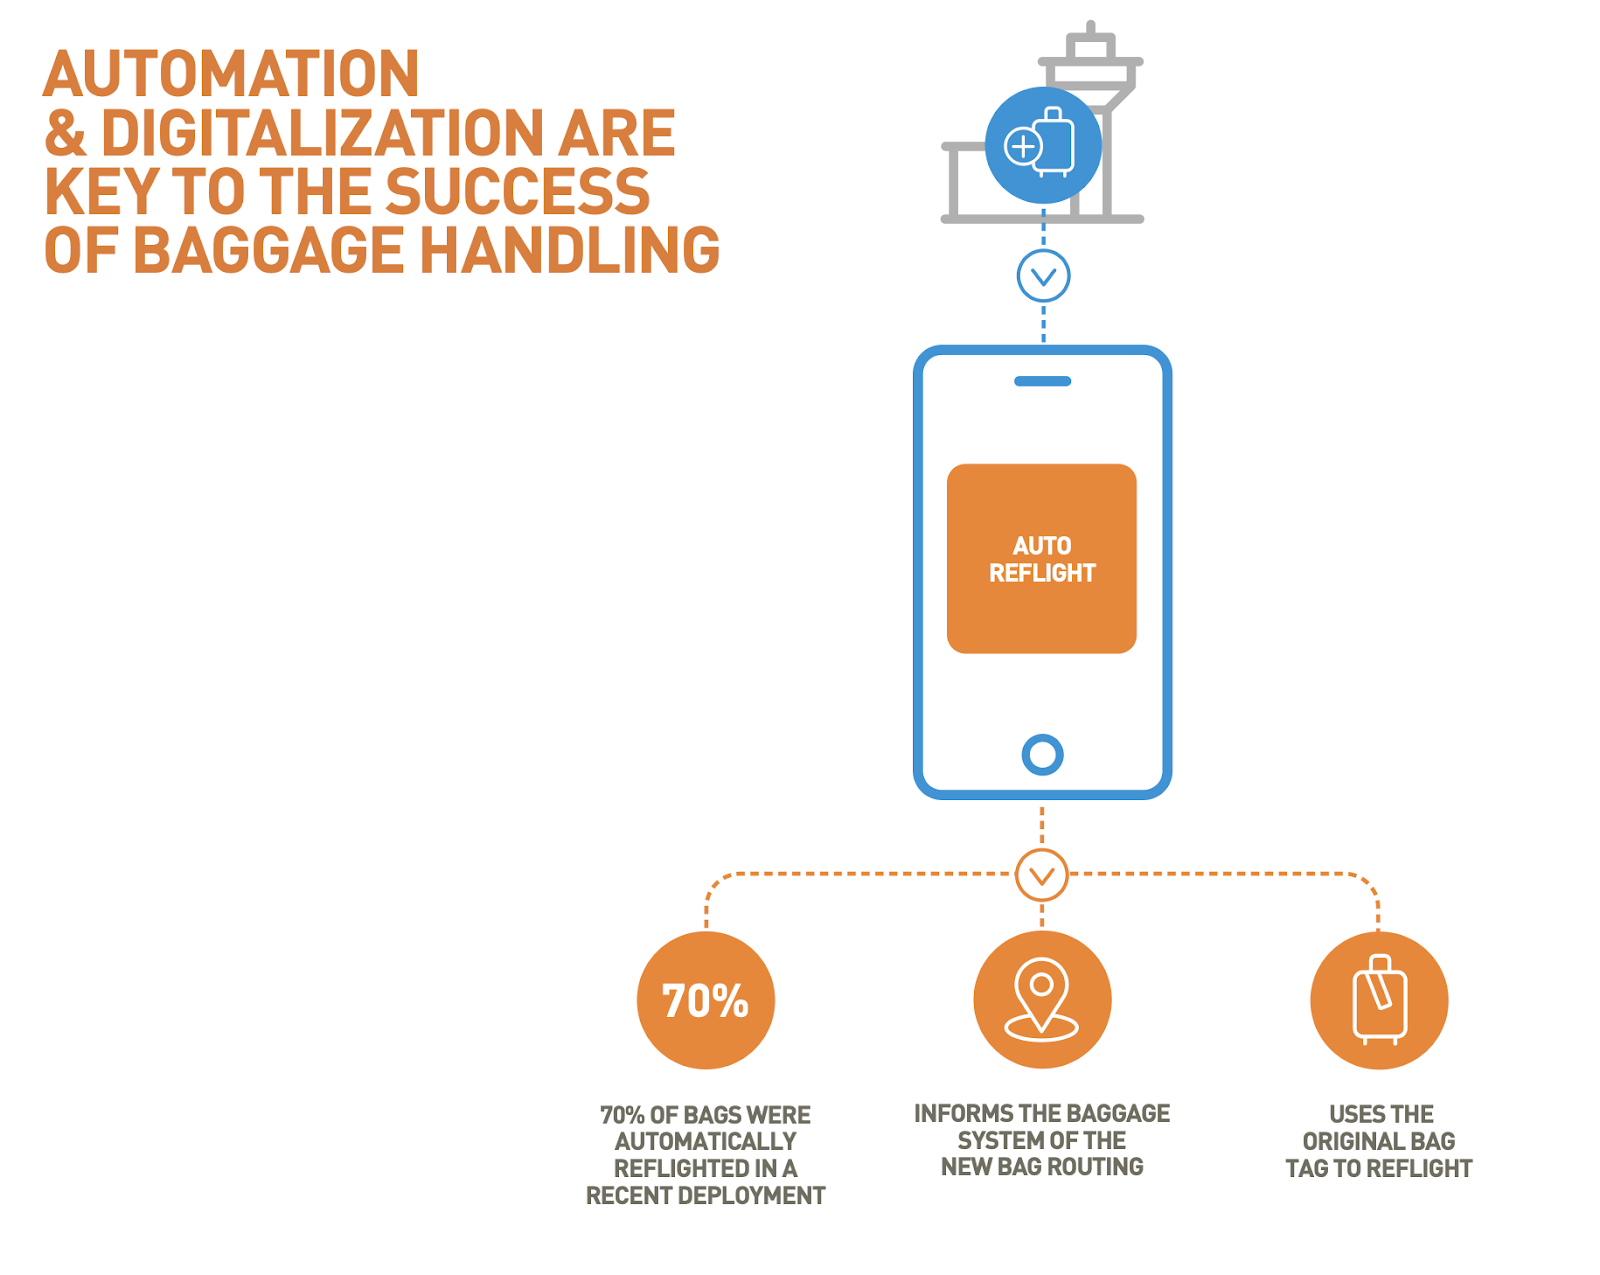 SITA graph, Automation & Digitalizaiton are key to the success of baggage handling. Illustrates SITA's Auto Reflight feature, where 70% of delayed bags were automatically reflighted in a recent deployment. Reflight informs the baggage system of the new bag routing, and uses the original bag tag to reflight. 